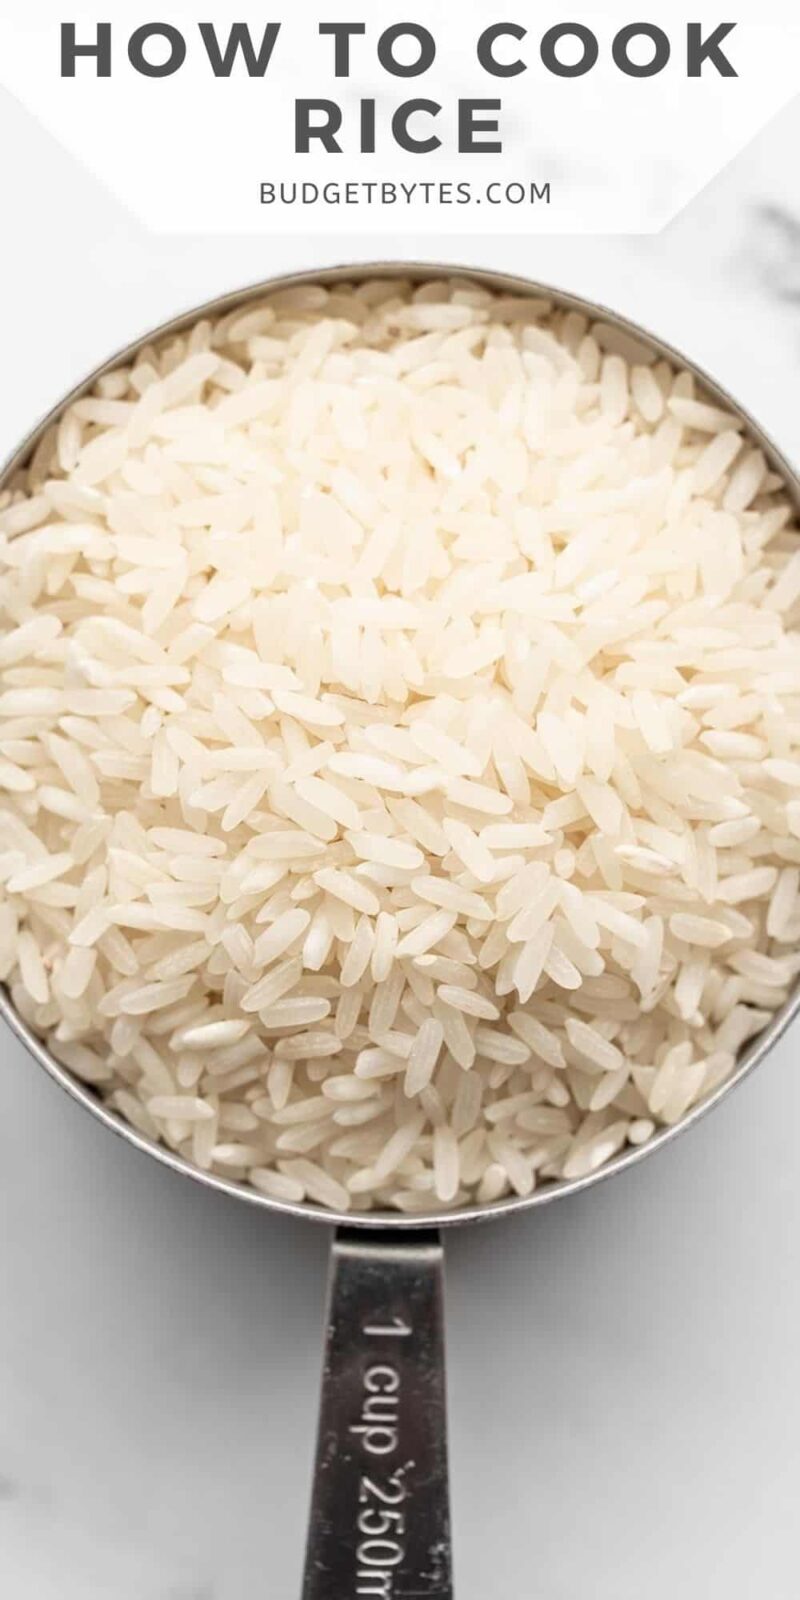 https://www.budgetbytes.com/wp-content/uploads/2022/04/How-to-Cook-Rice-PIN1-800x1600.jpg